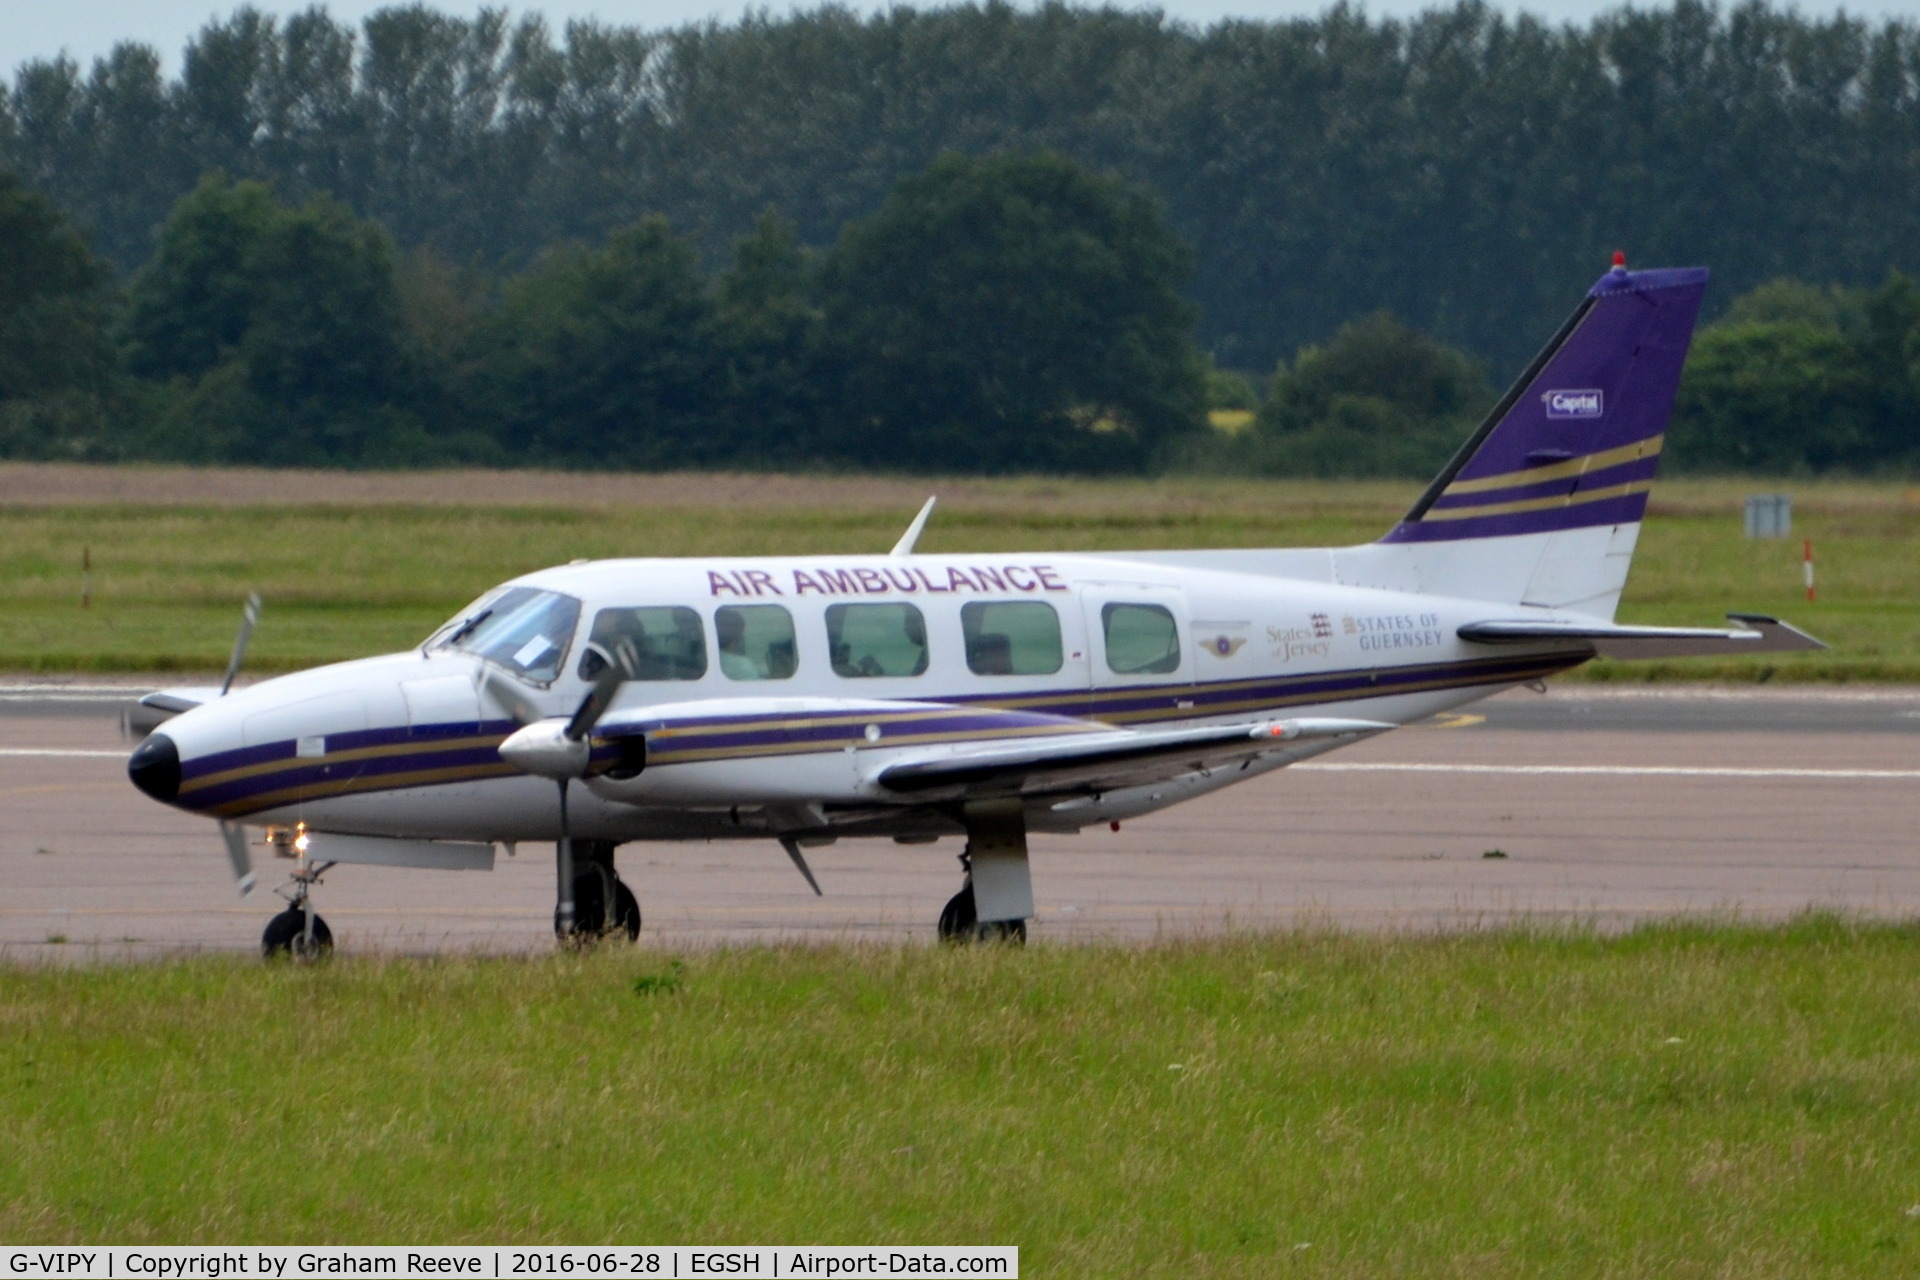 G-VIPY, 1978 Piper PA-31-350 Chieftain C/N 31-7852143, Just landed at Norwich.